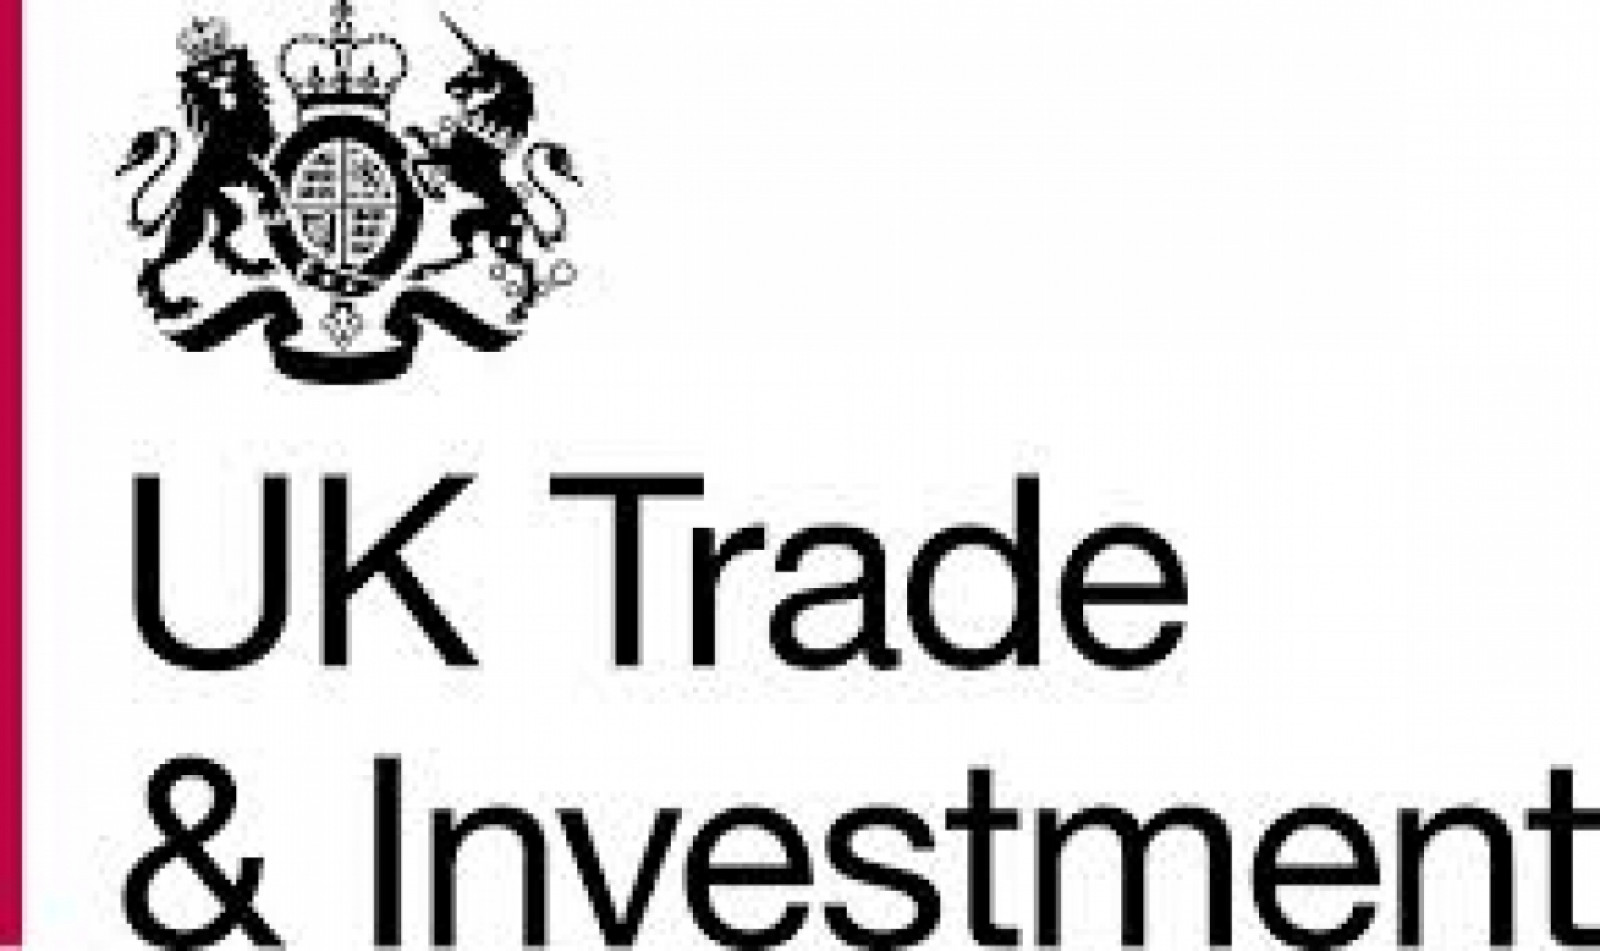 Government urged to market UKTI more strongly to counter lack of awareness